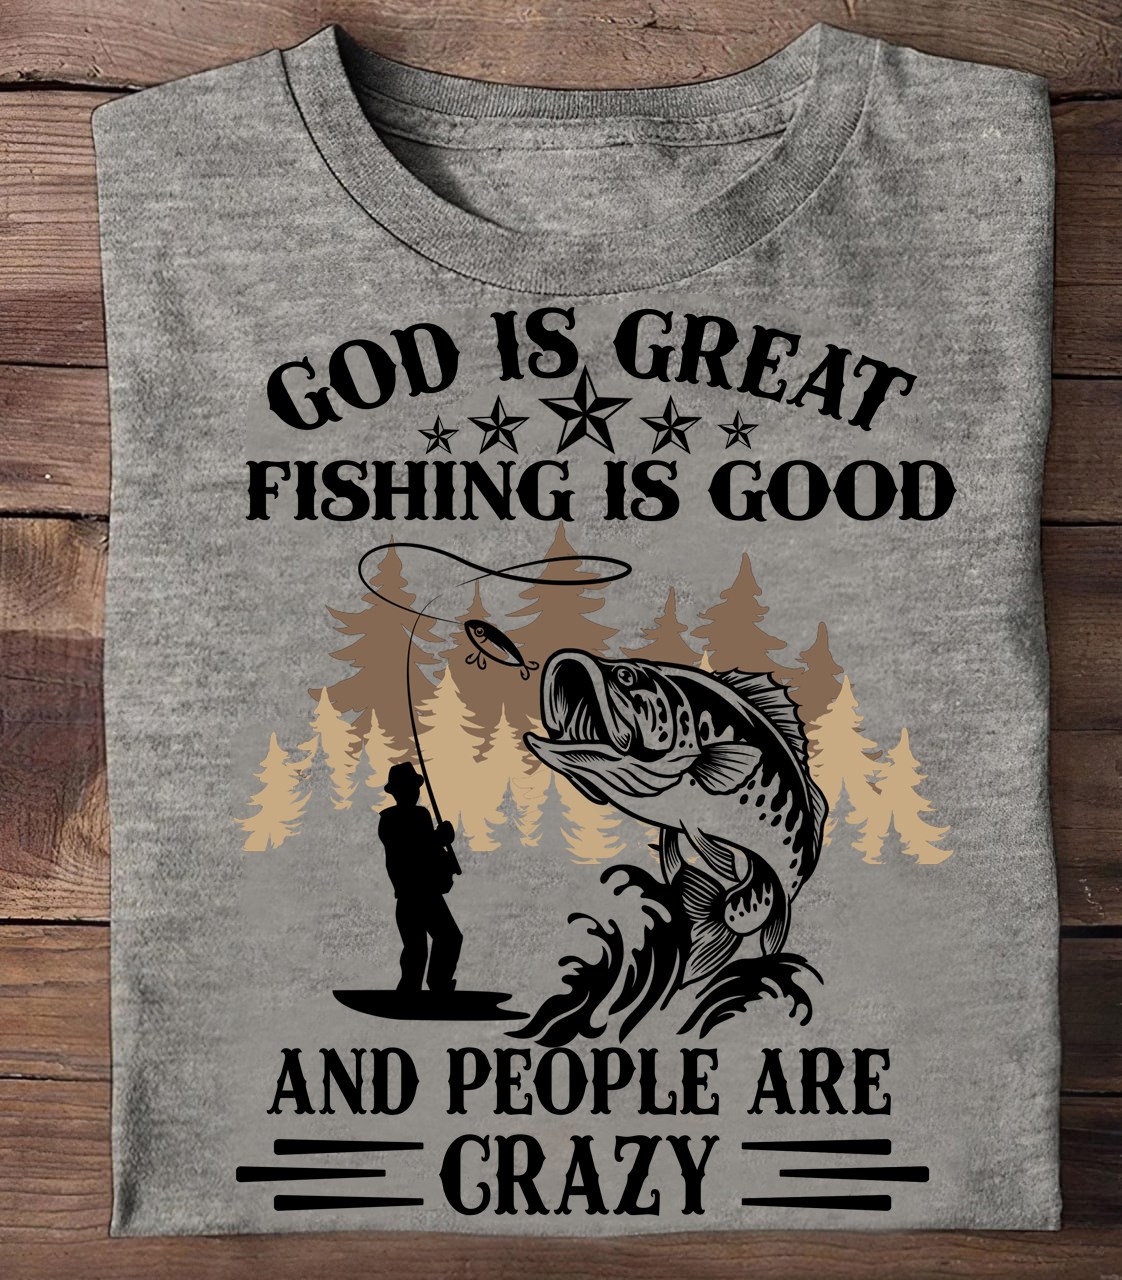 God is great fishing is good and people are crazy